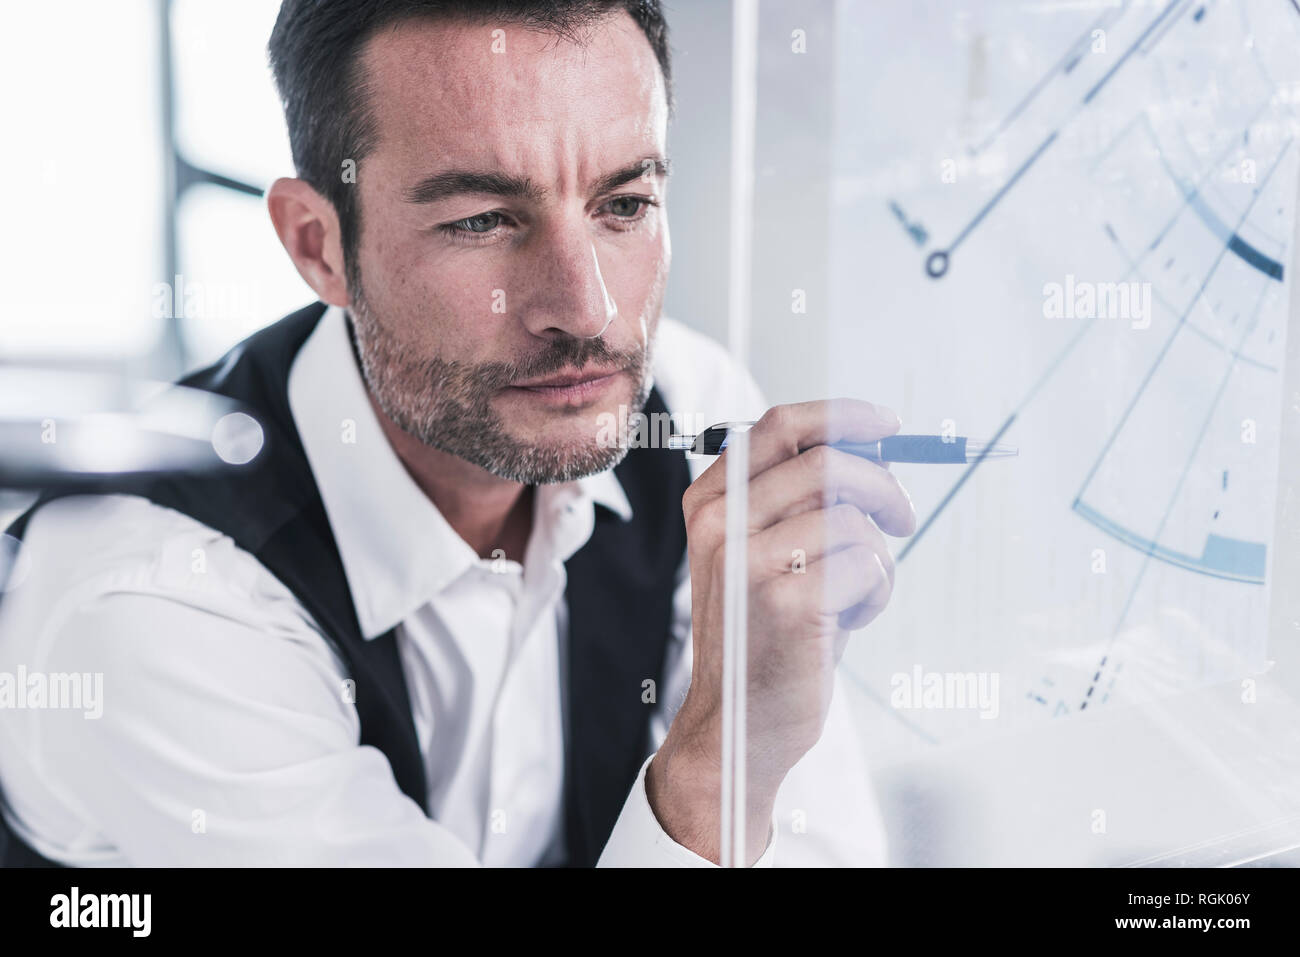 Businessman working in office, using futuristic computer with a transperant screen Stock Photo